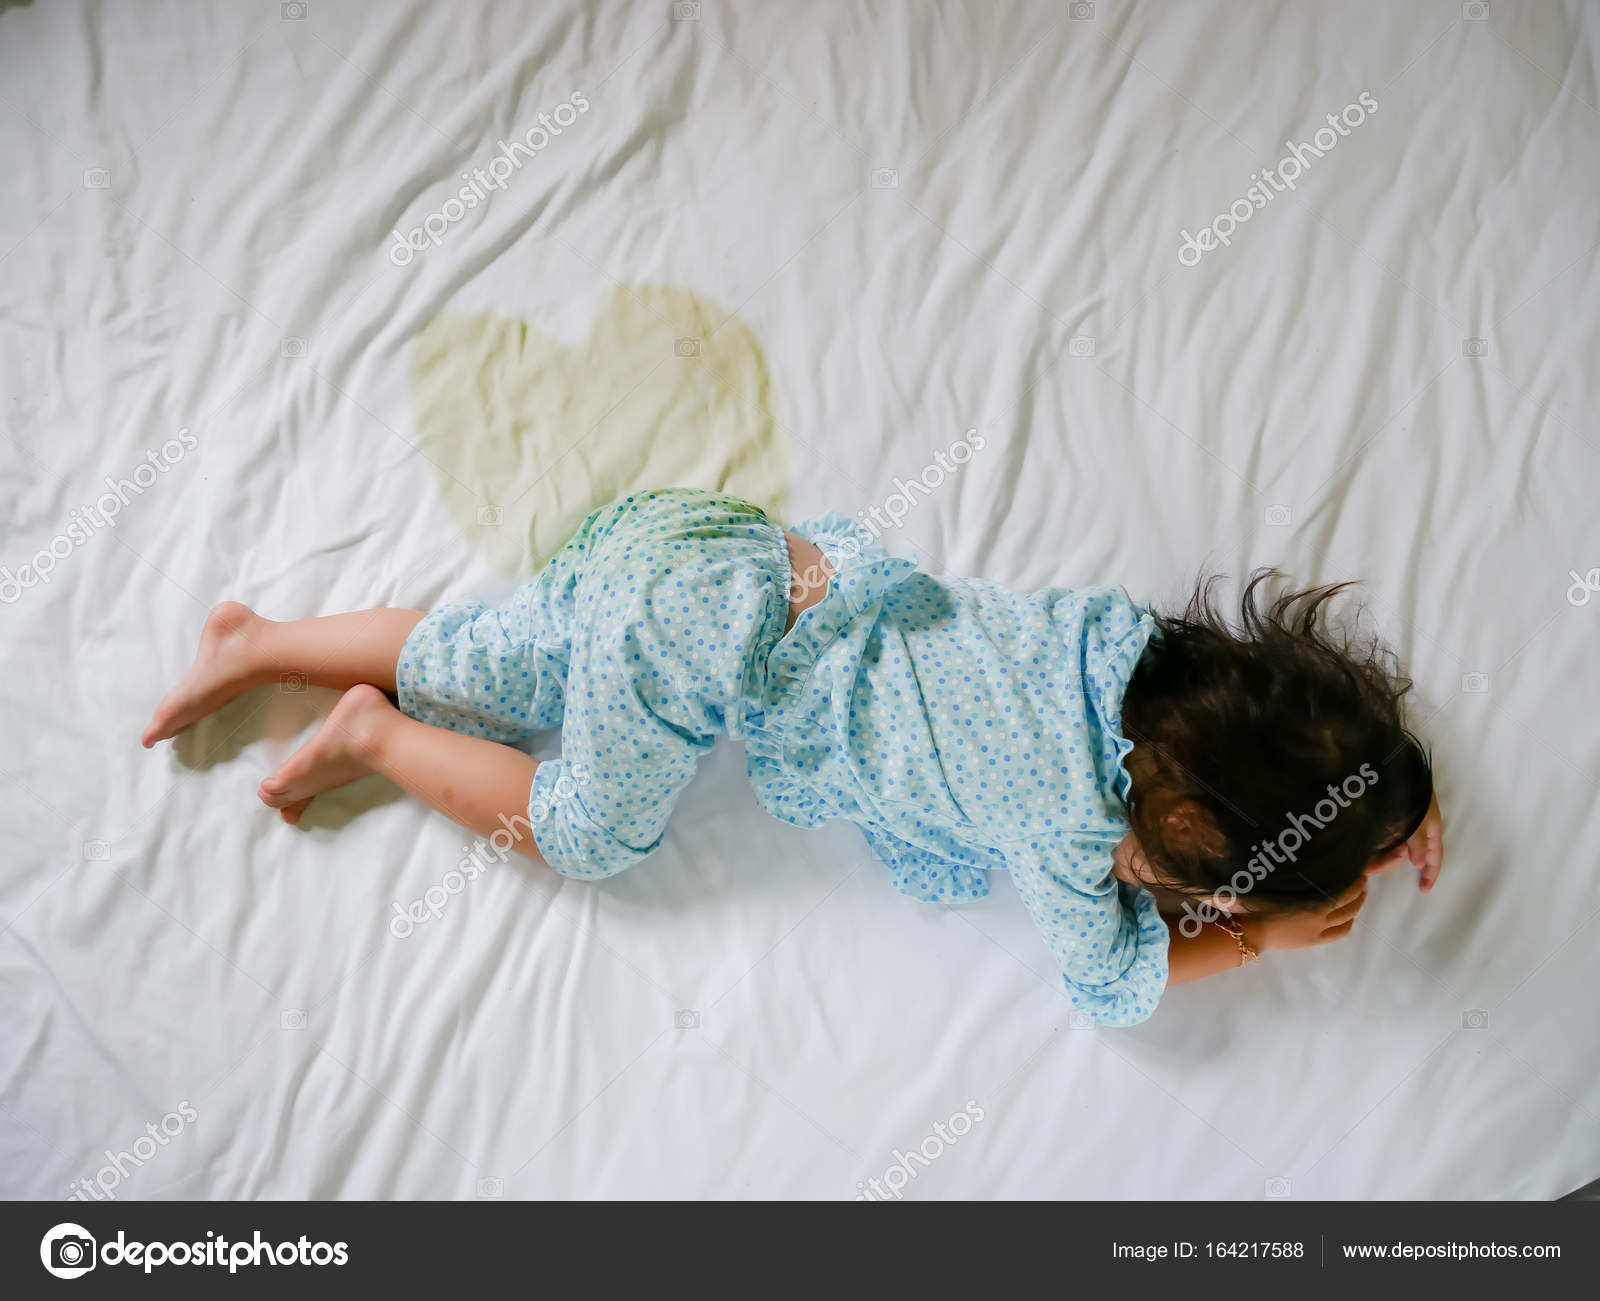 Bedwetting Child Pee On A Mattress Little Girl Feet And Pee In Bed Sheet Child Development Concept Selected Focus At Wet On The Bed Stock Photo Image By C Jes2uphoto